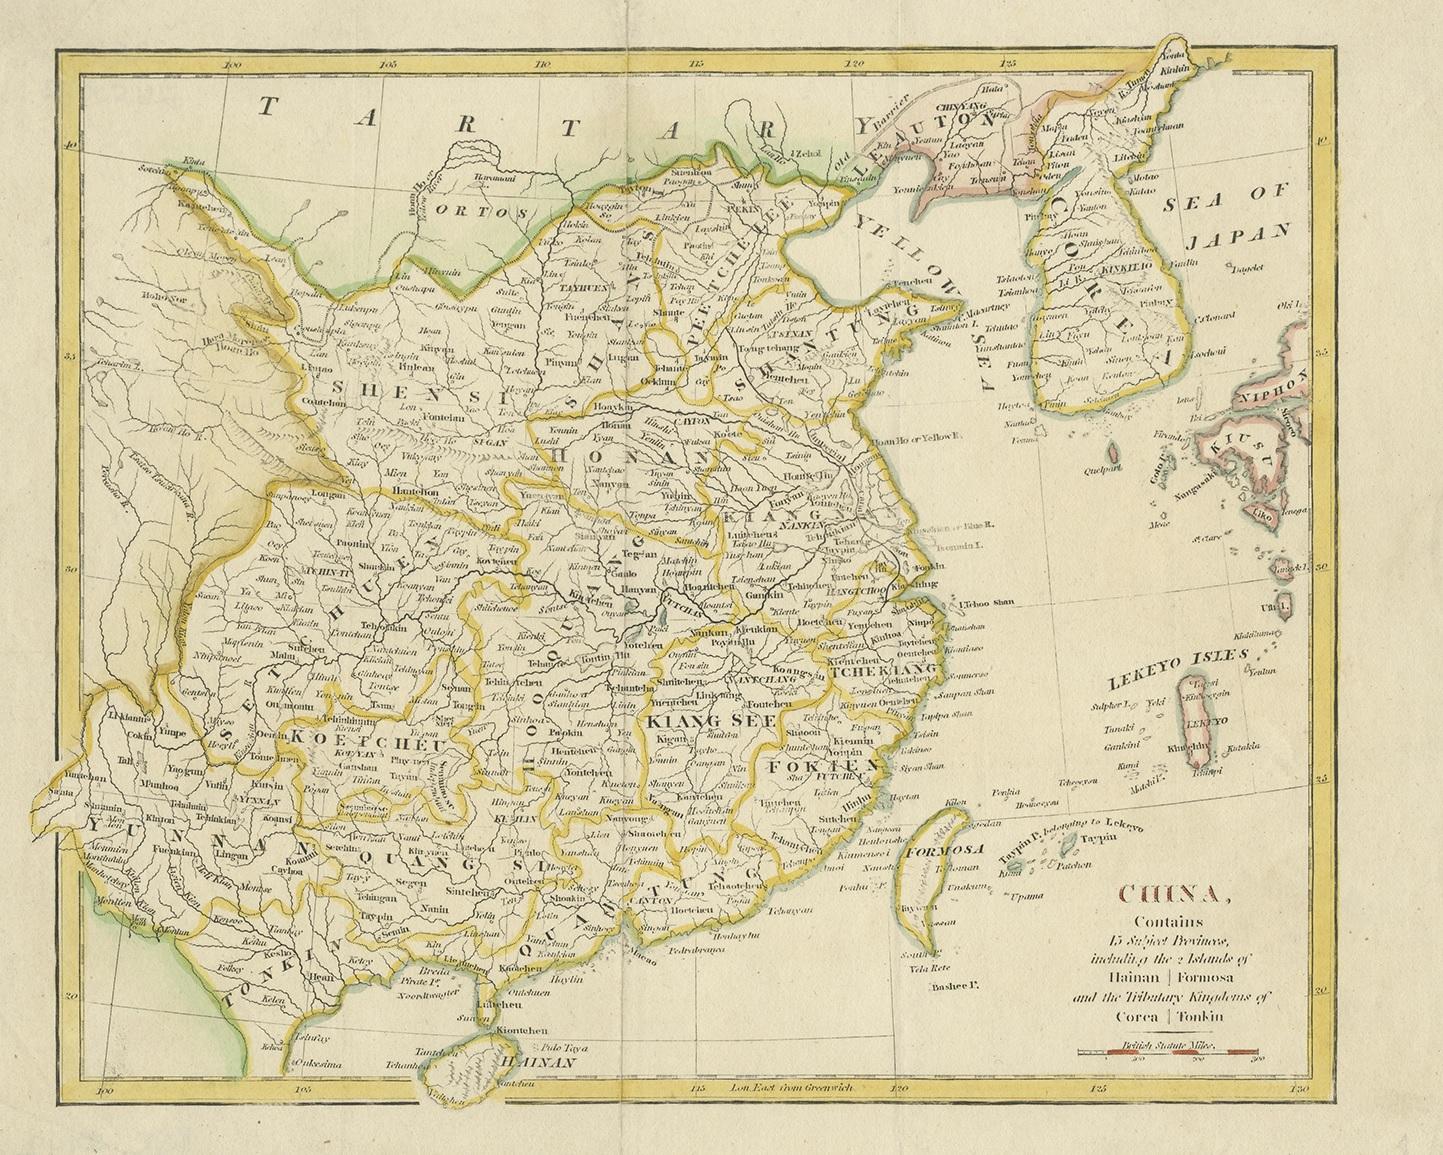 Antique map titled 'China, Contains 15 Subject Provinces Including the 2 Islands of Hainan, Formosa and the Tributary Kingdoms of Korea, Tonkin'. Old map depicting China, extending from Korea and the Sea of Japan to Teypin Island in the south.